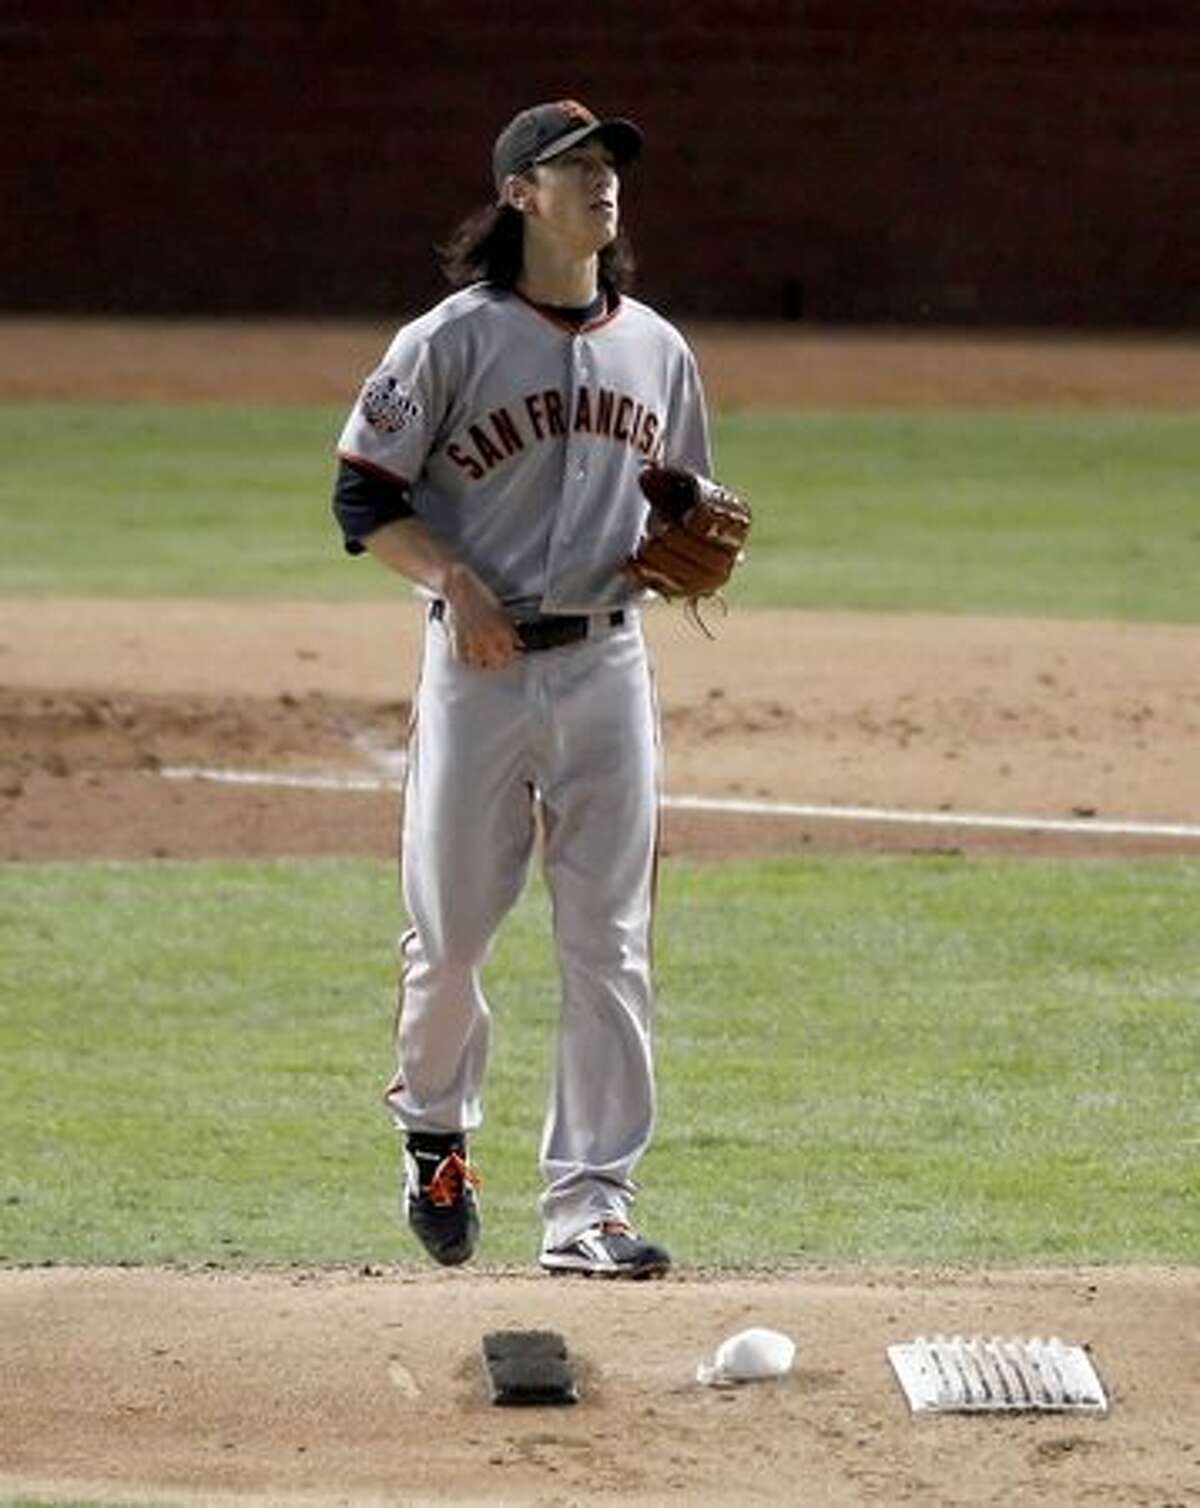 San Francisco Giants starting pitcher Tim Lincecum (55) returns to the mound after striking out Bengie Molina in the third inning during game 5 of the 2010 World Series between the San Francisco Giants and the Texas Rangers on Monday in Arlington, Tx.